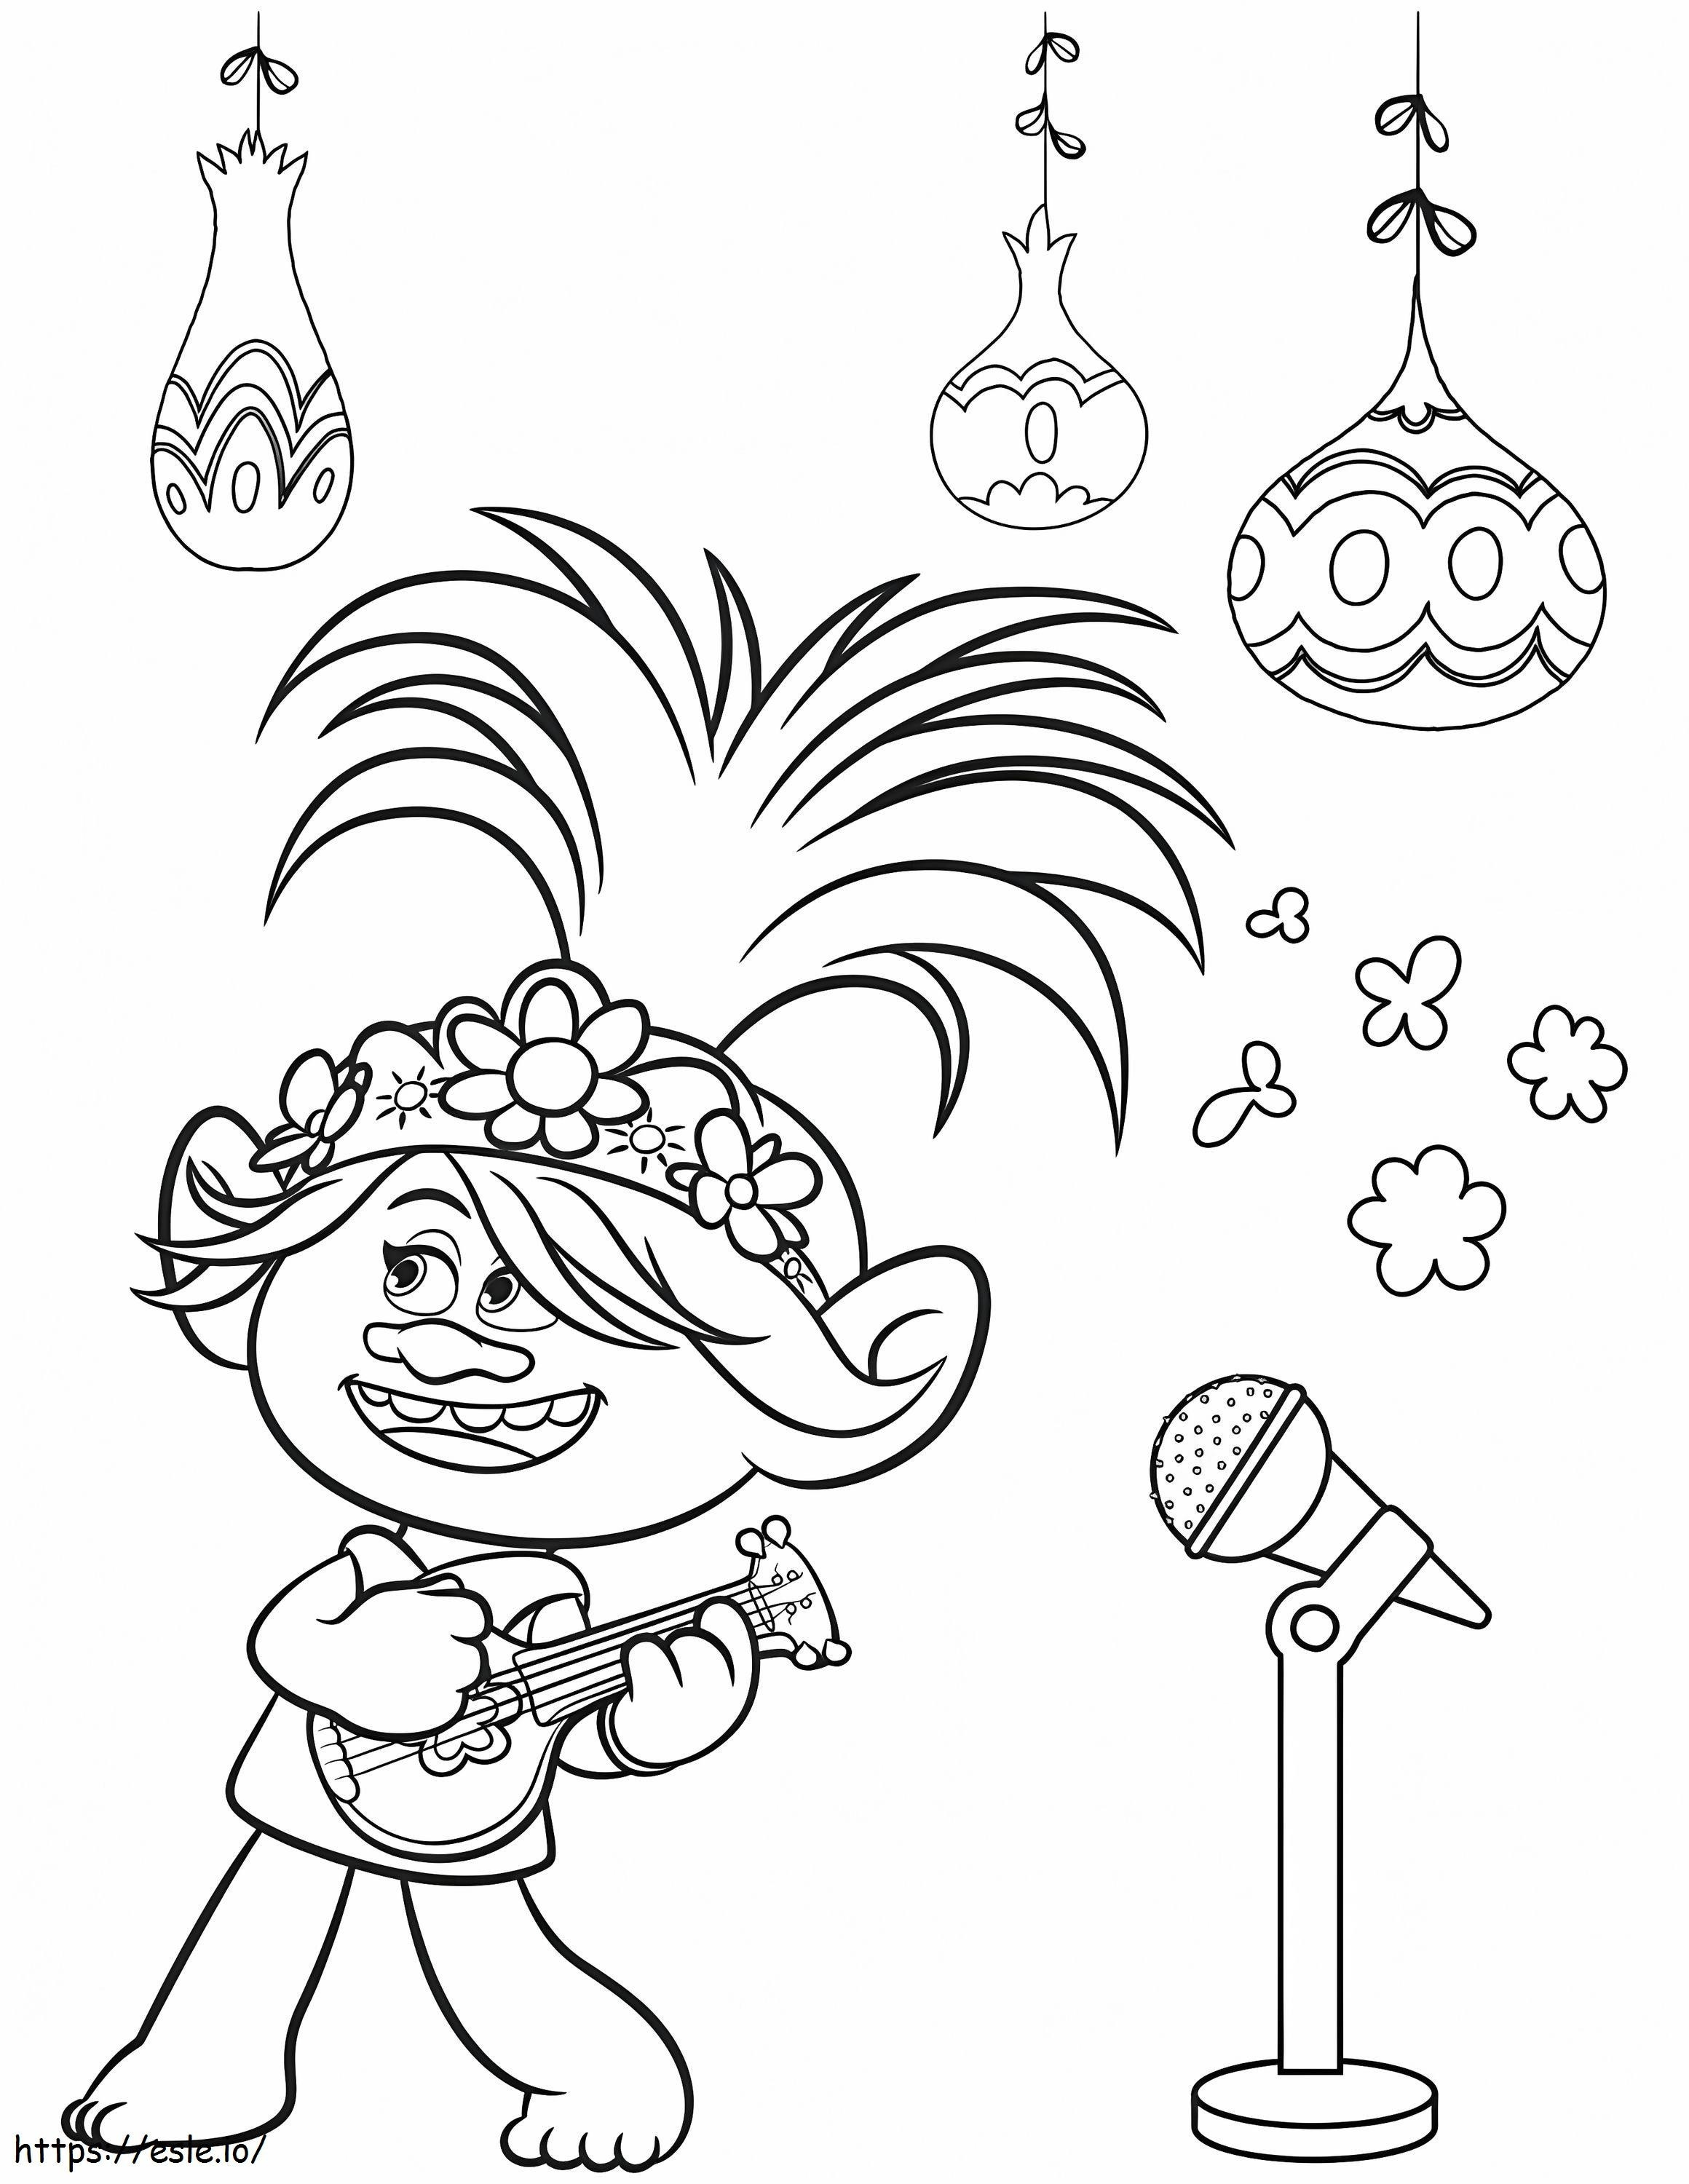 1588904017 1586291135 Youloveit Com Trolls World Tour08 coloring page